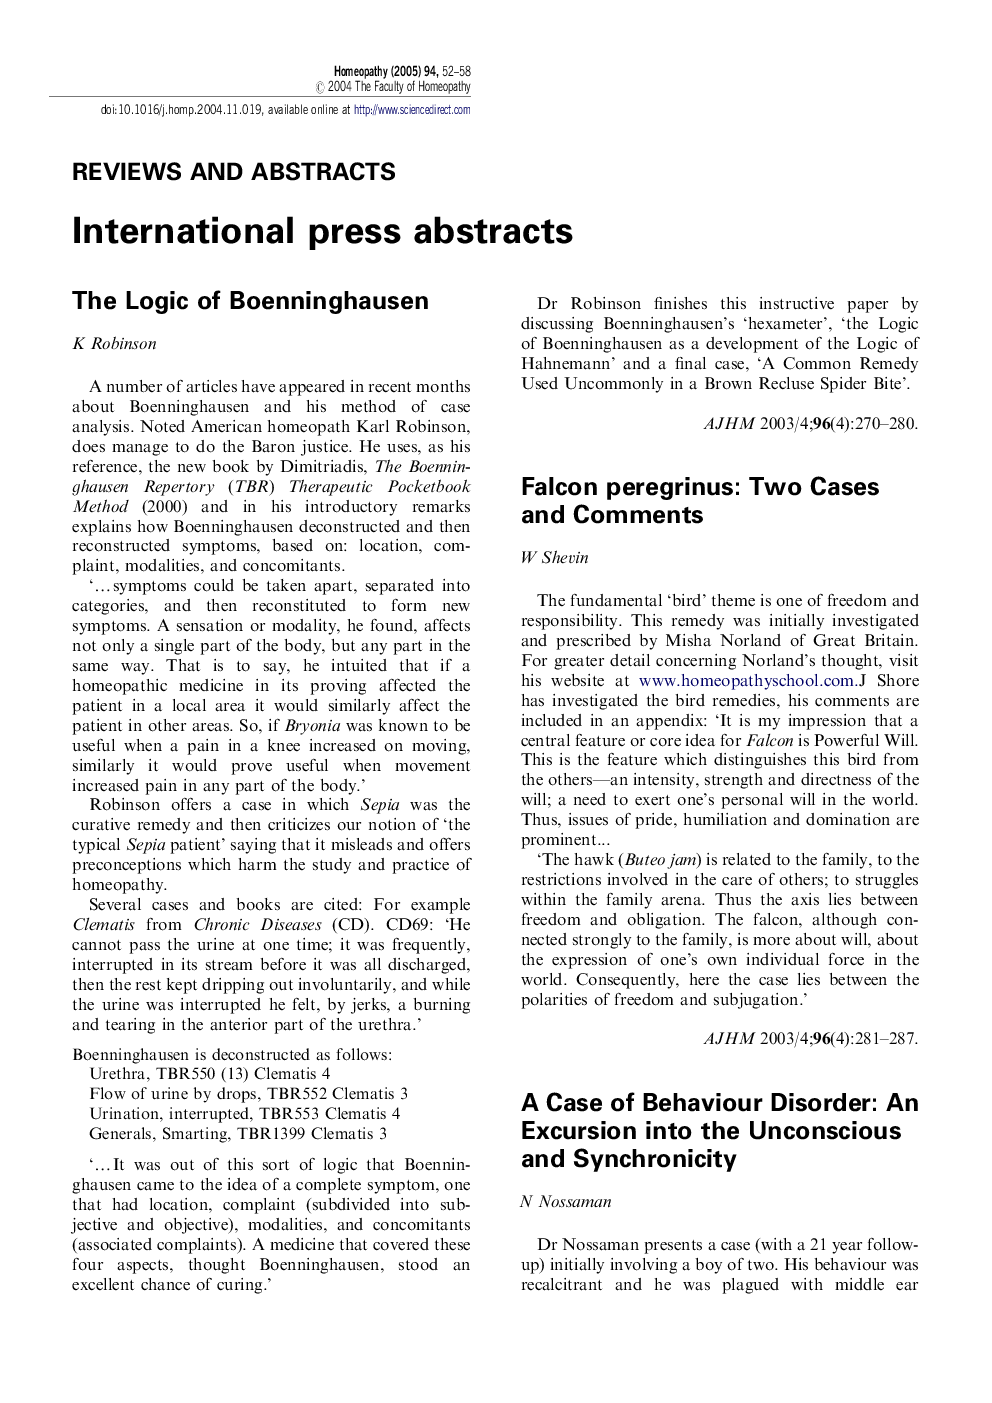 International press abstracts